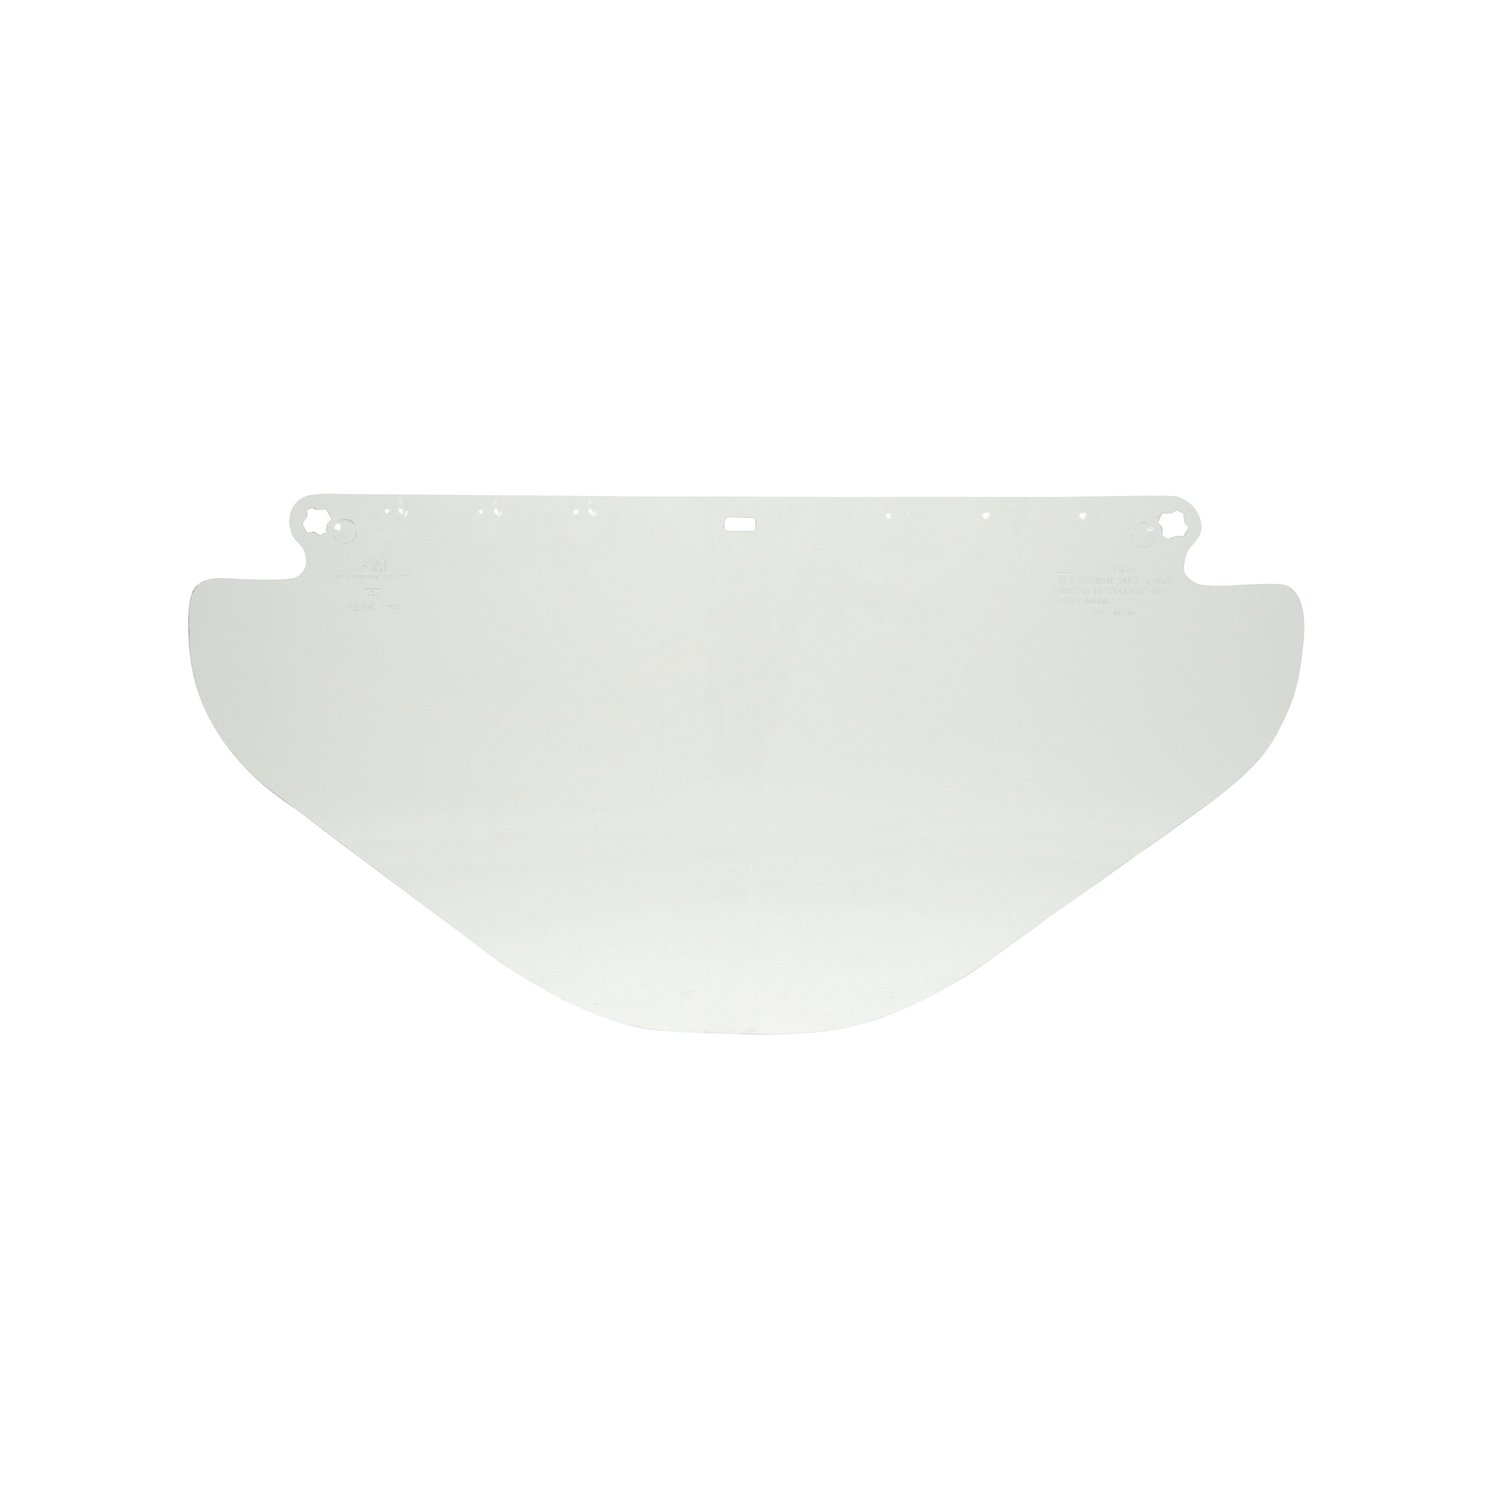 7000127236 - 3M Wide Clear Polycarbonate Faceshield WP96X 82582-00000, Flat Stock 25
EA/Case